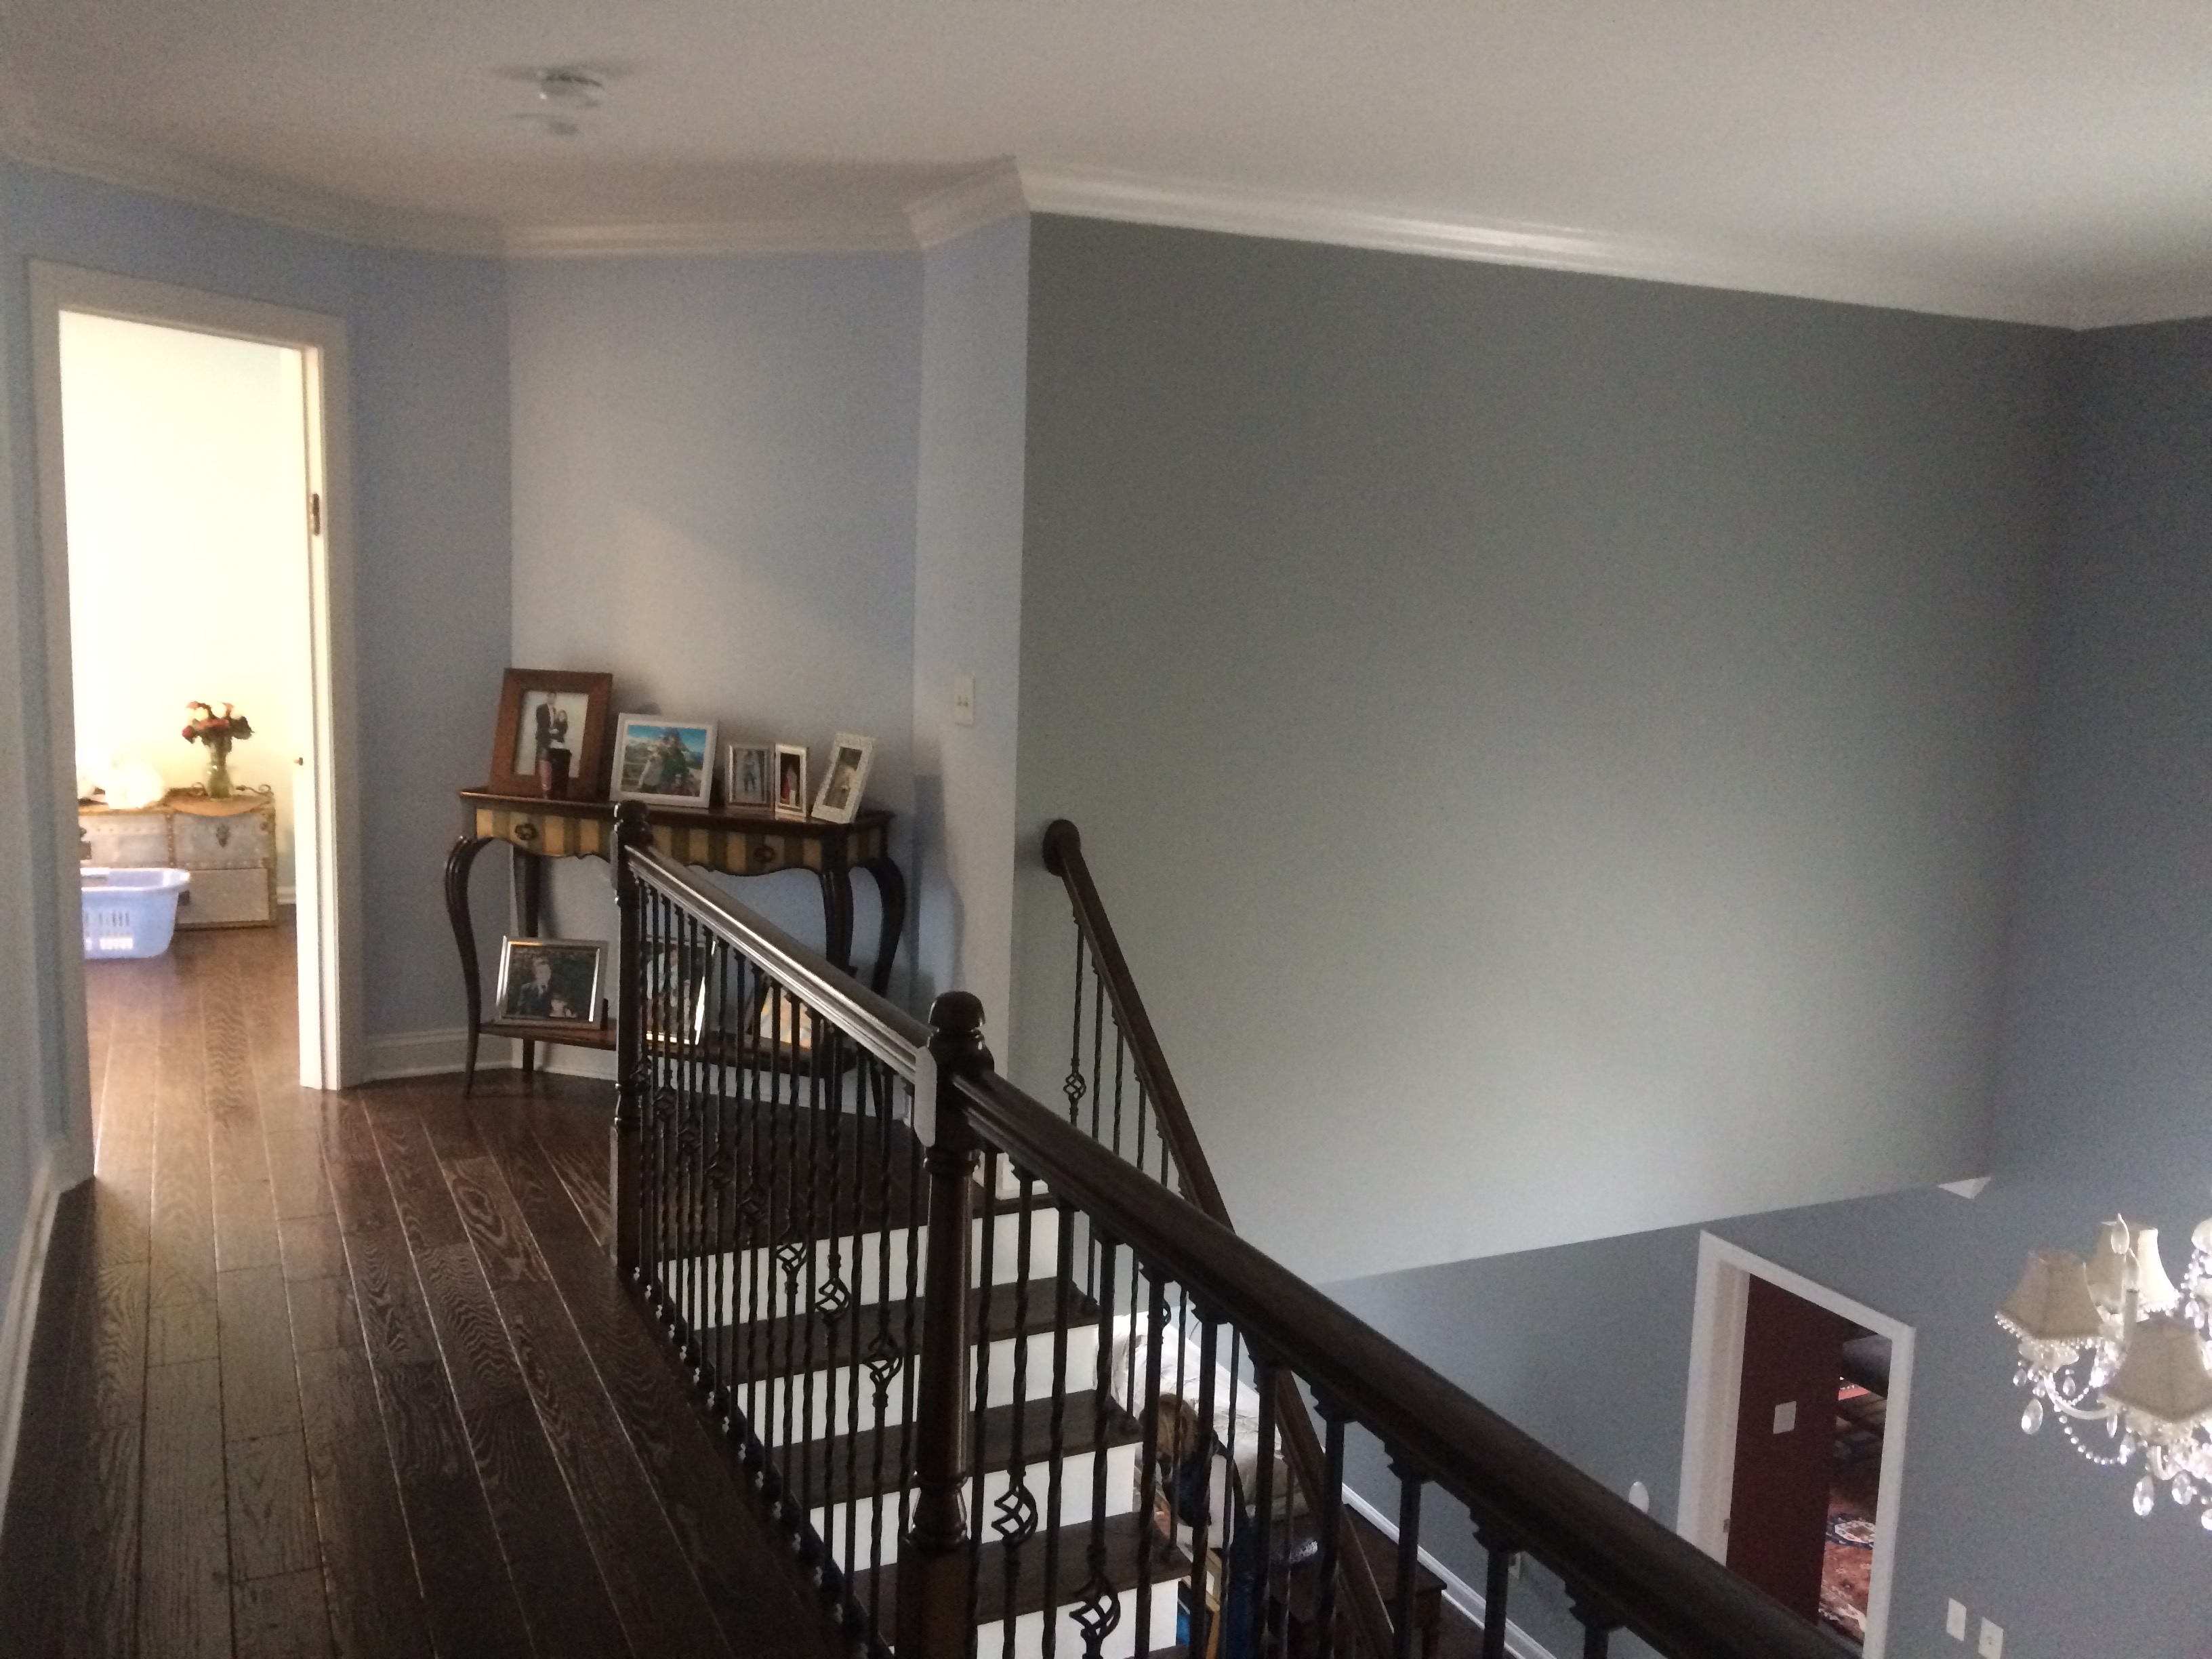 Upper landing and stairway by CertaPro in Princeton Junction